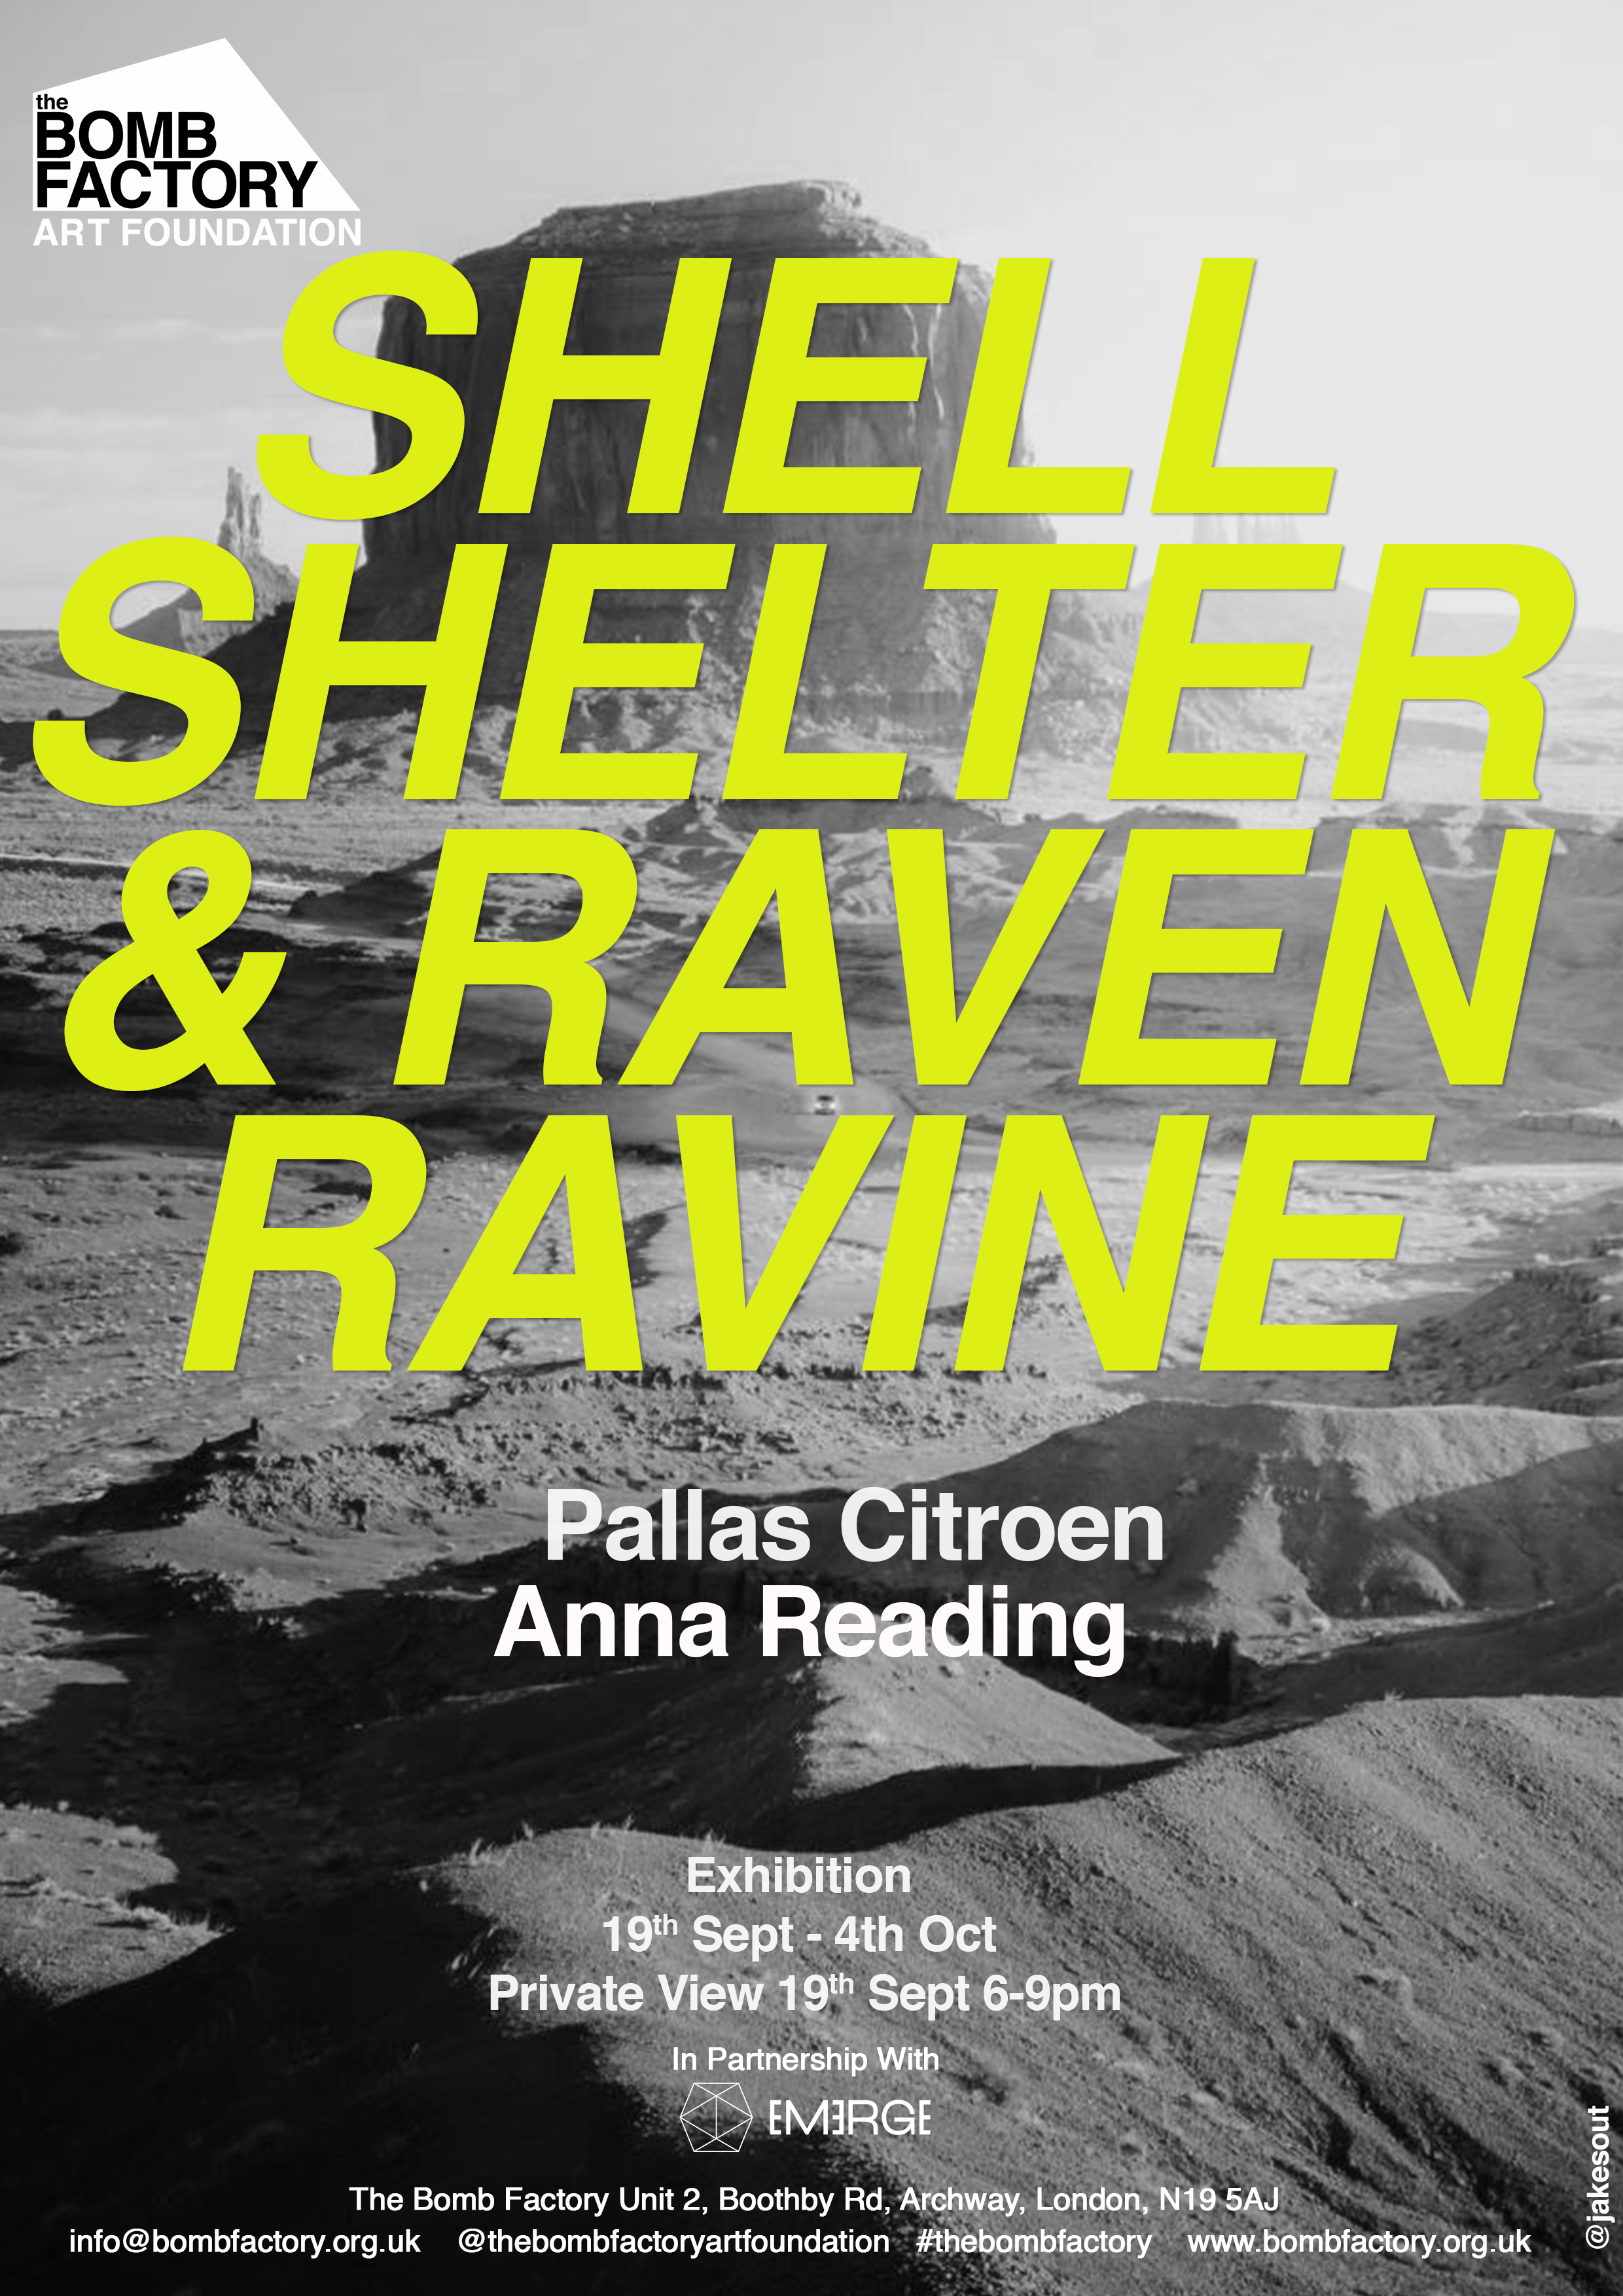 Shell Shelter and Raven Ravine - The Bomb Factory Art Foundation